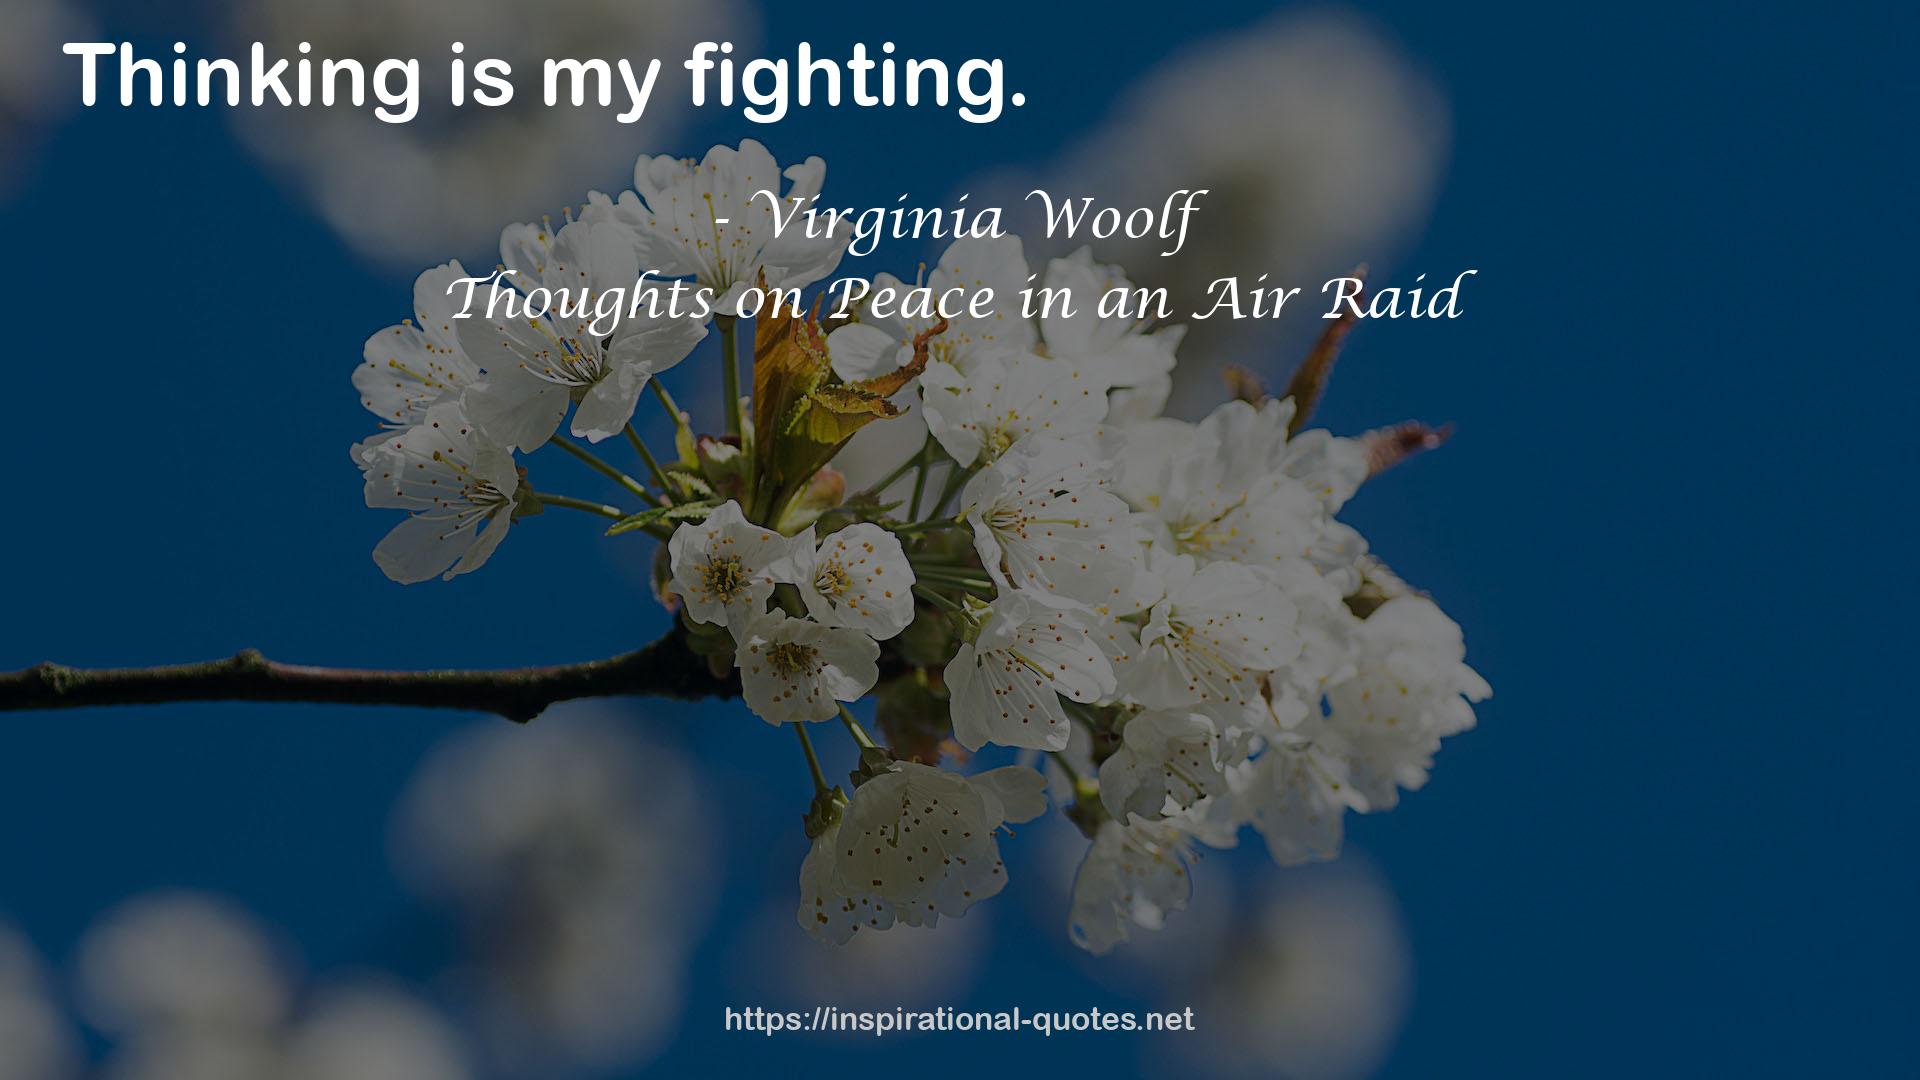 Thoughts on Peace in an Air Raid QUOTES